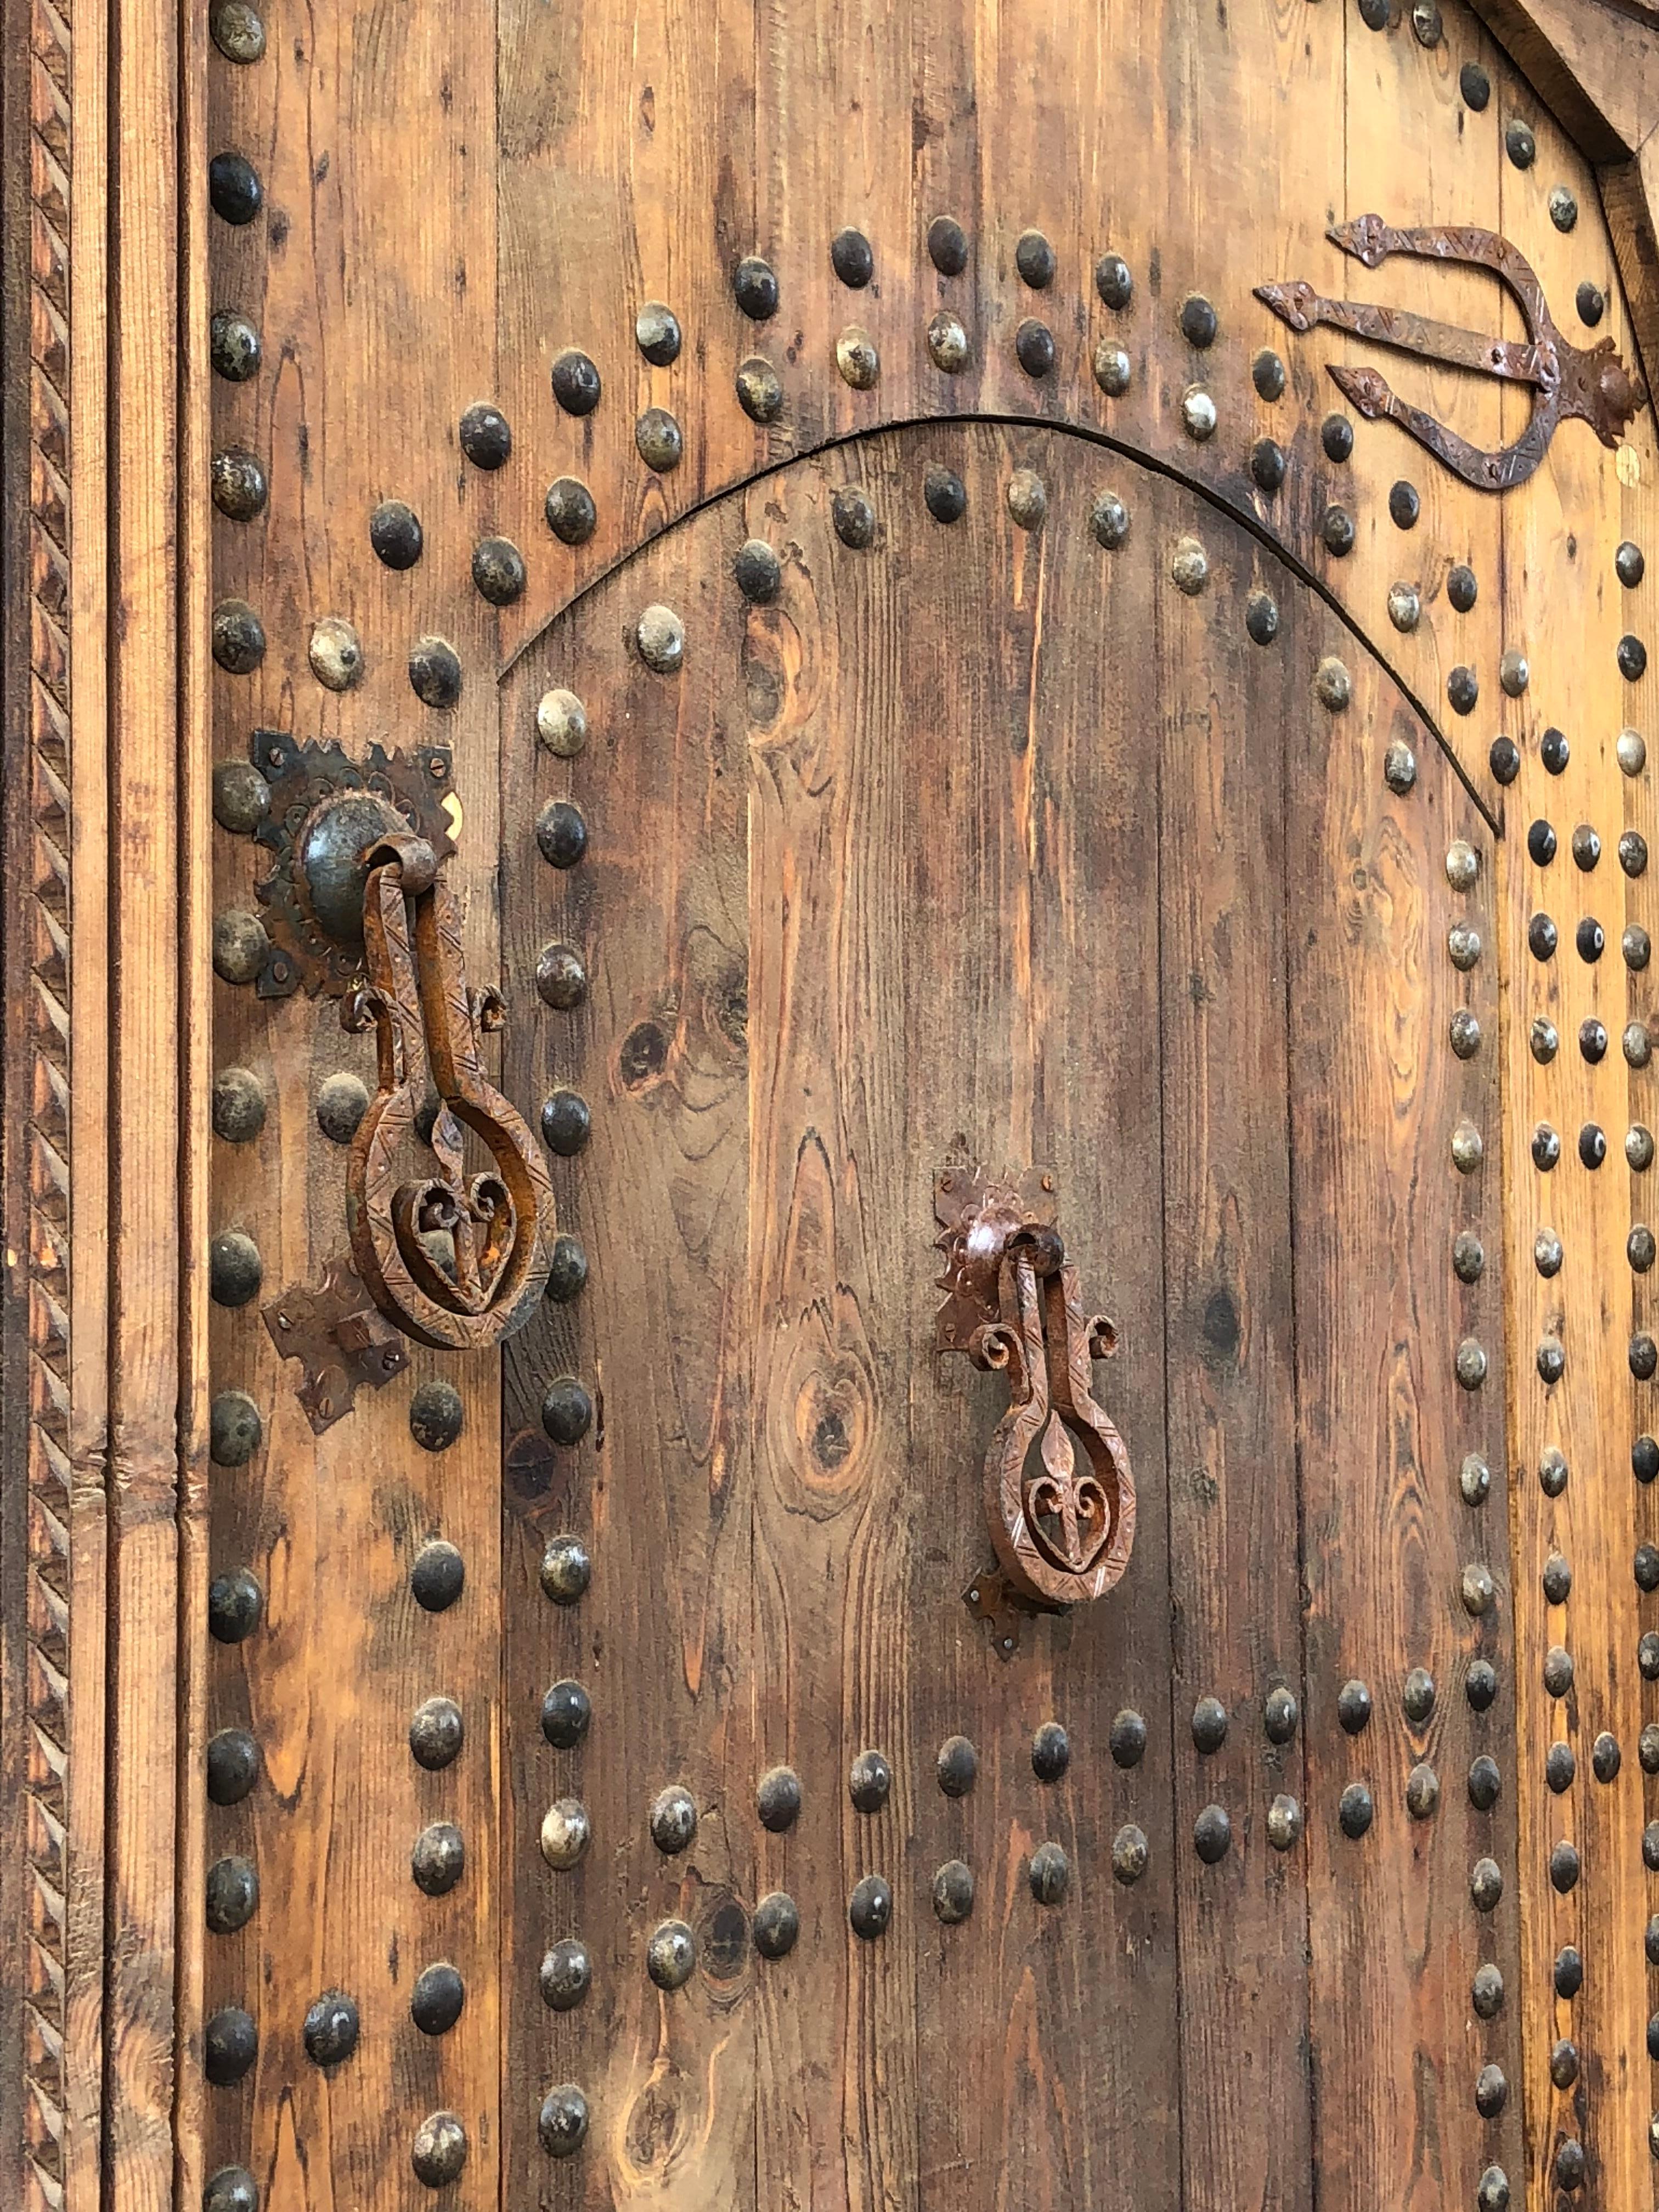 
Moorish Moroccan handmade and hand carved indigenous cedar and local white wood door adorned with Moorish traditional nails heads and hand forged hardware. Moroccans used these kind of doors for centuries, great workmanship, sturdy & solid. This